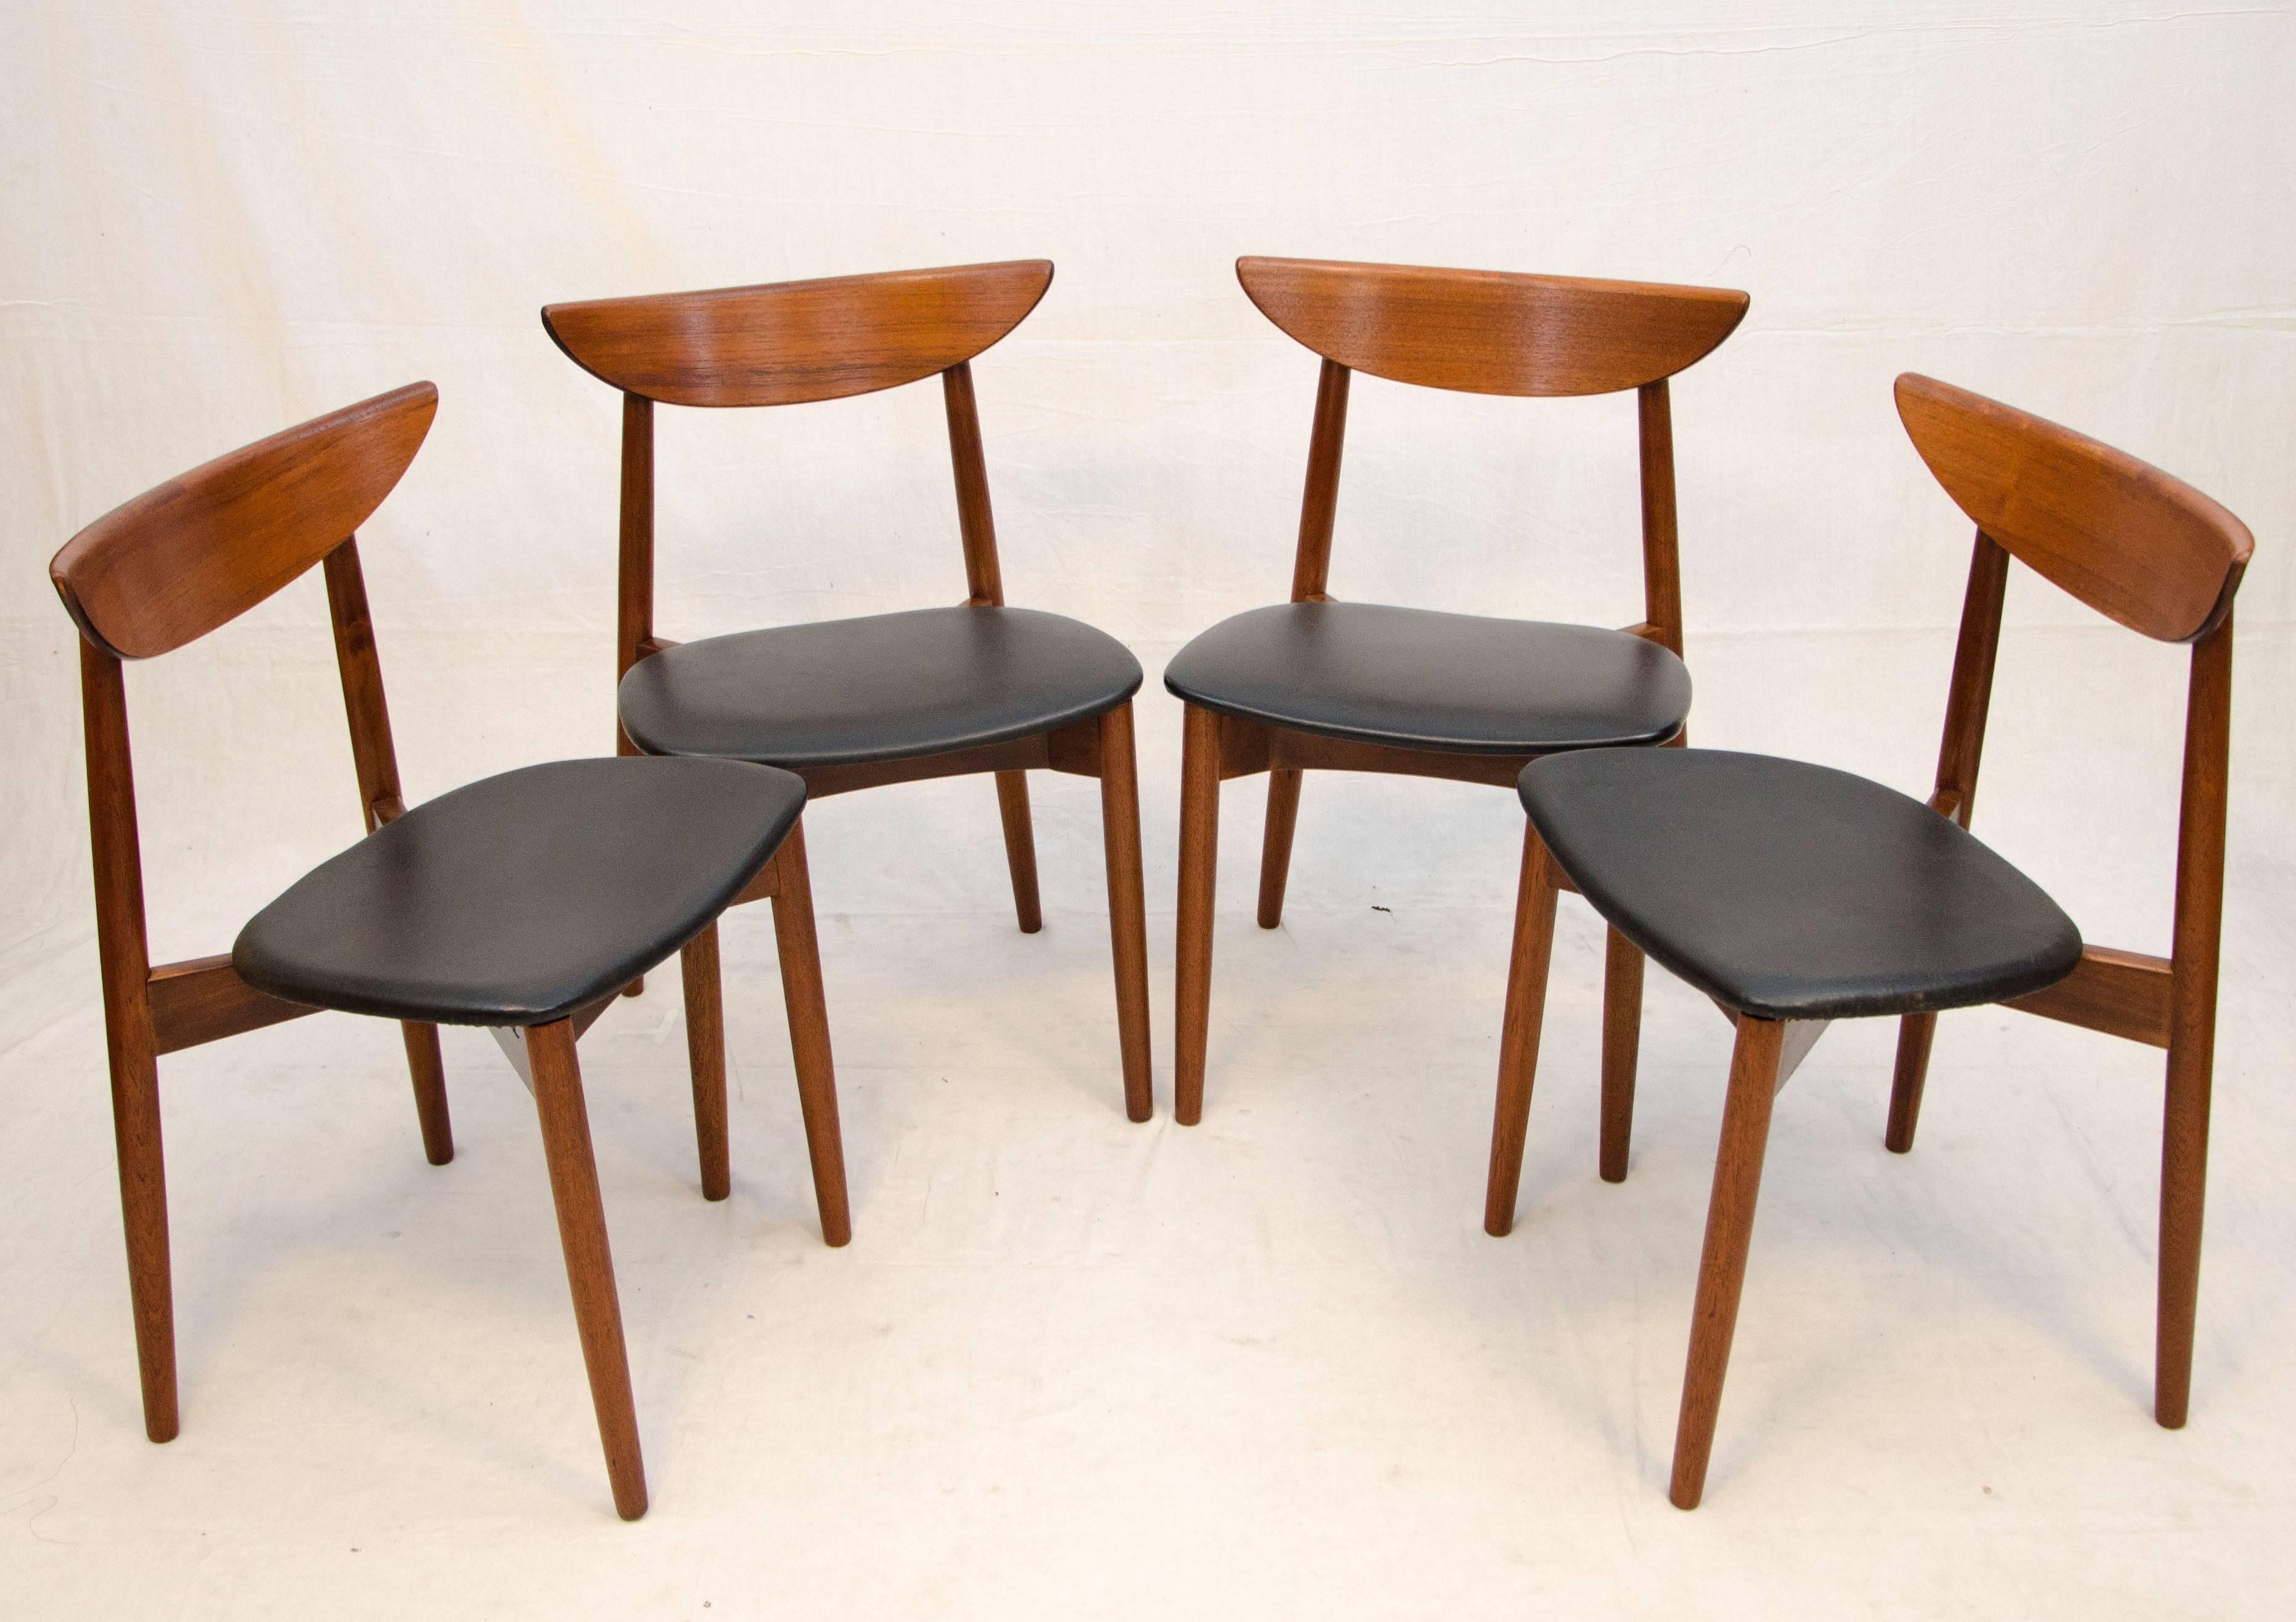 Stylish set of four Danish teak dining chairs designed by Harry Ostergaard for Moreddi. These chairs are uniquely accented by a tapered curved ledge that runs at the top of each back. The upholstered seats are original and easily detached for